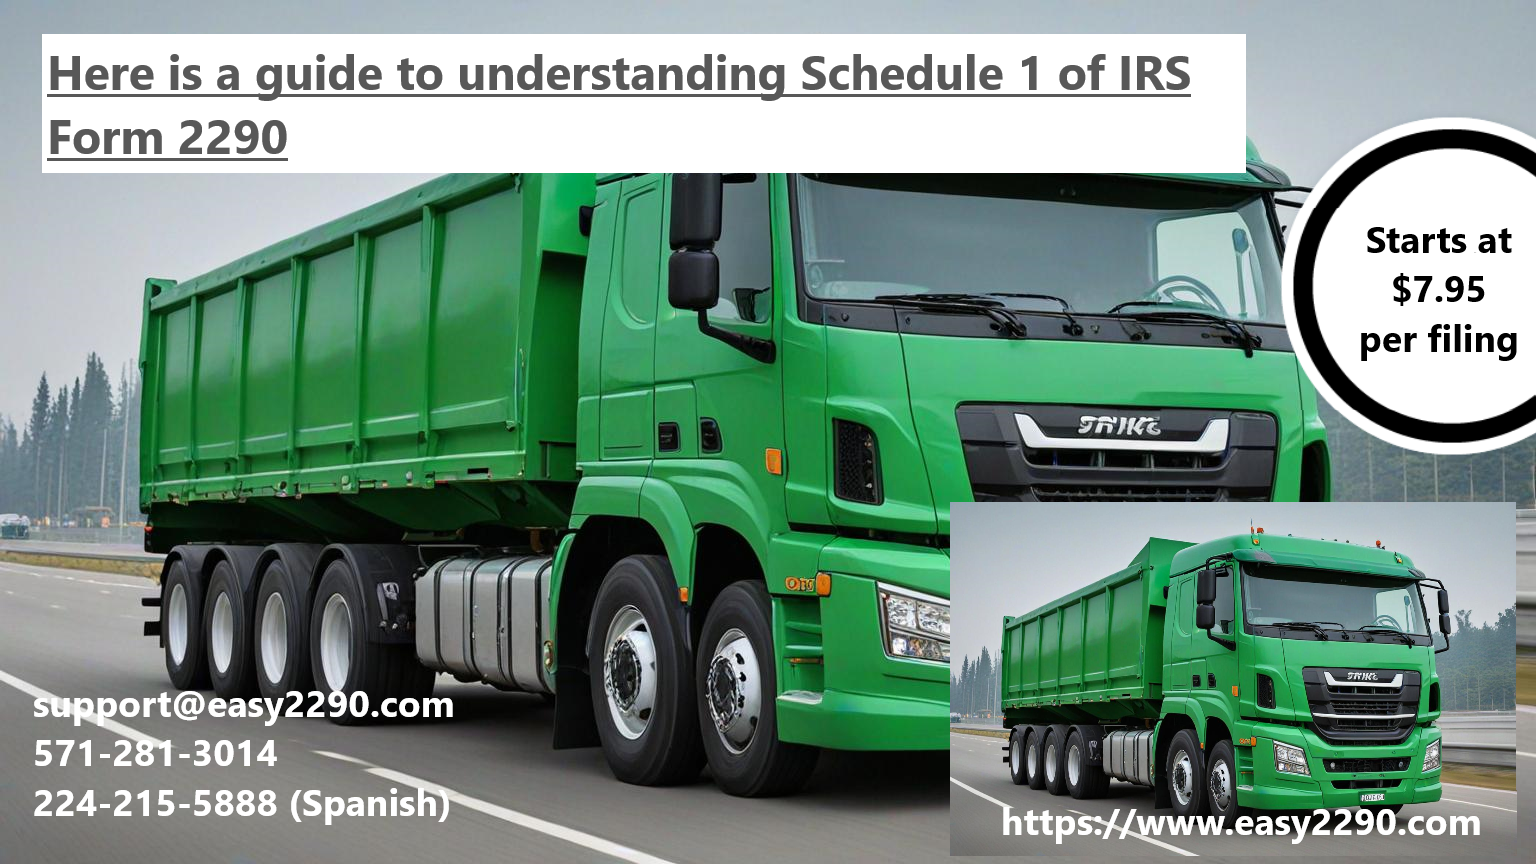 Here is a guide to understanding Schedule 1 of IRS Form 2290